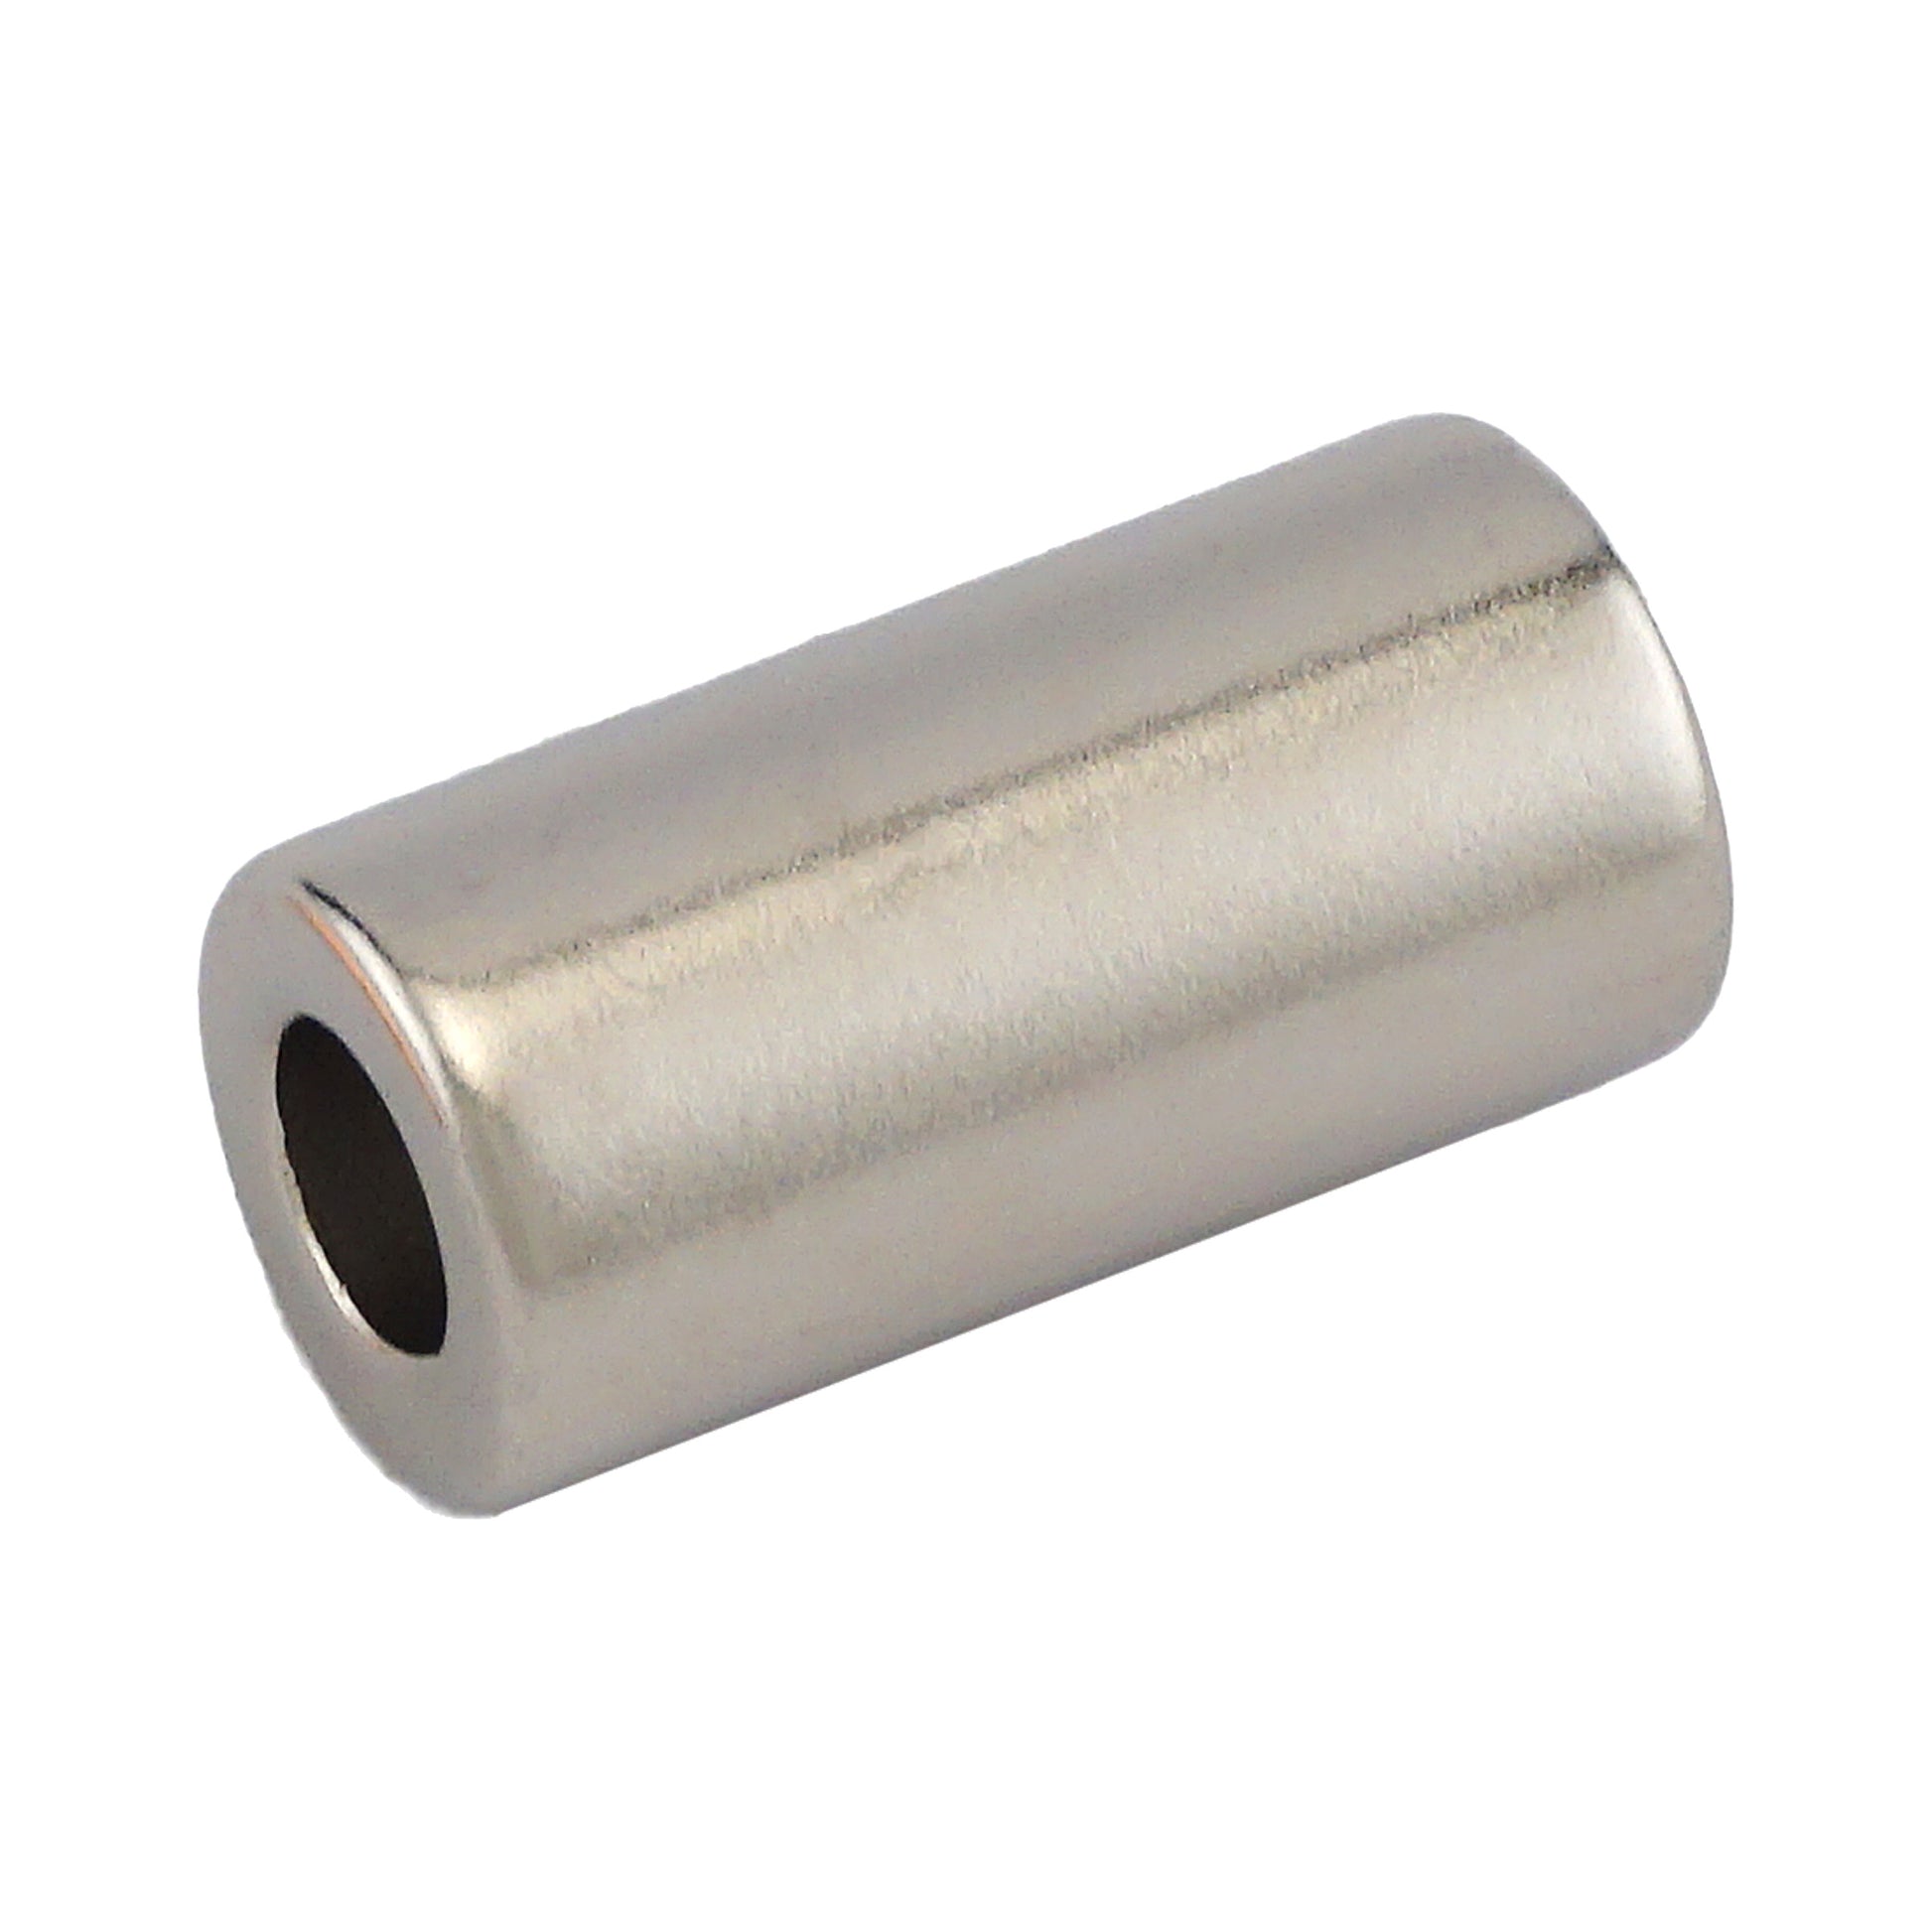 Load image into Gallery viewer, NR005024N Neodymium Ring Magnet - 45 Degree Angle View